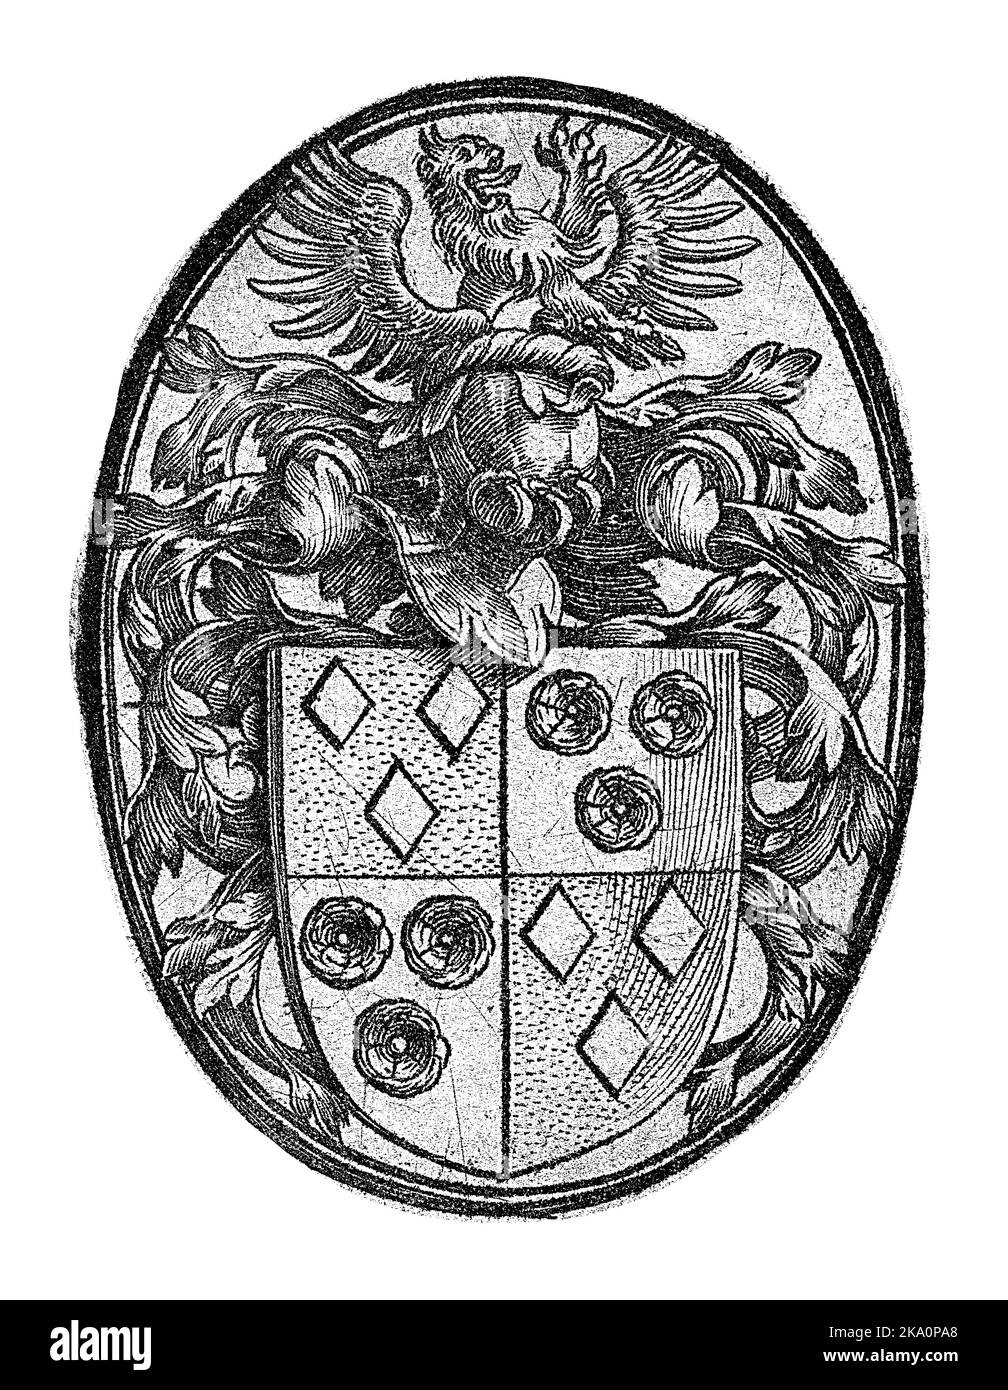 Coat of arms of the Van Heussen family from Haarlem (twice three diamonds and twice three rosettes) in oval. Belongs to a portrait of Jan van Heussen. Stock Photo